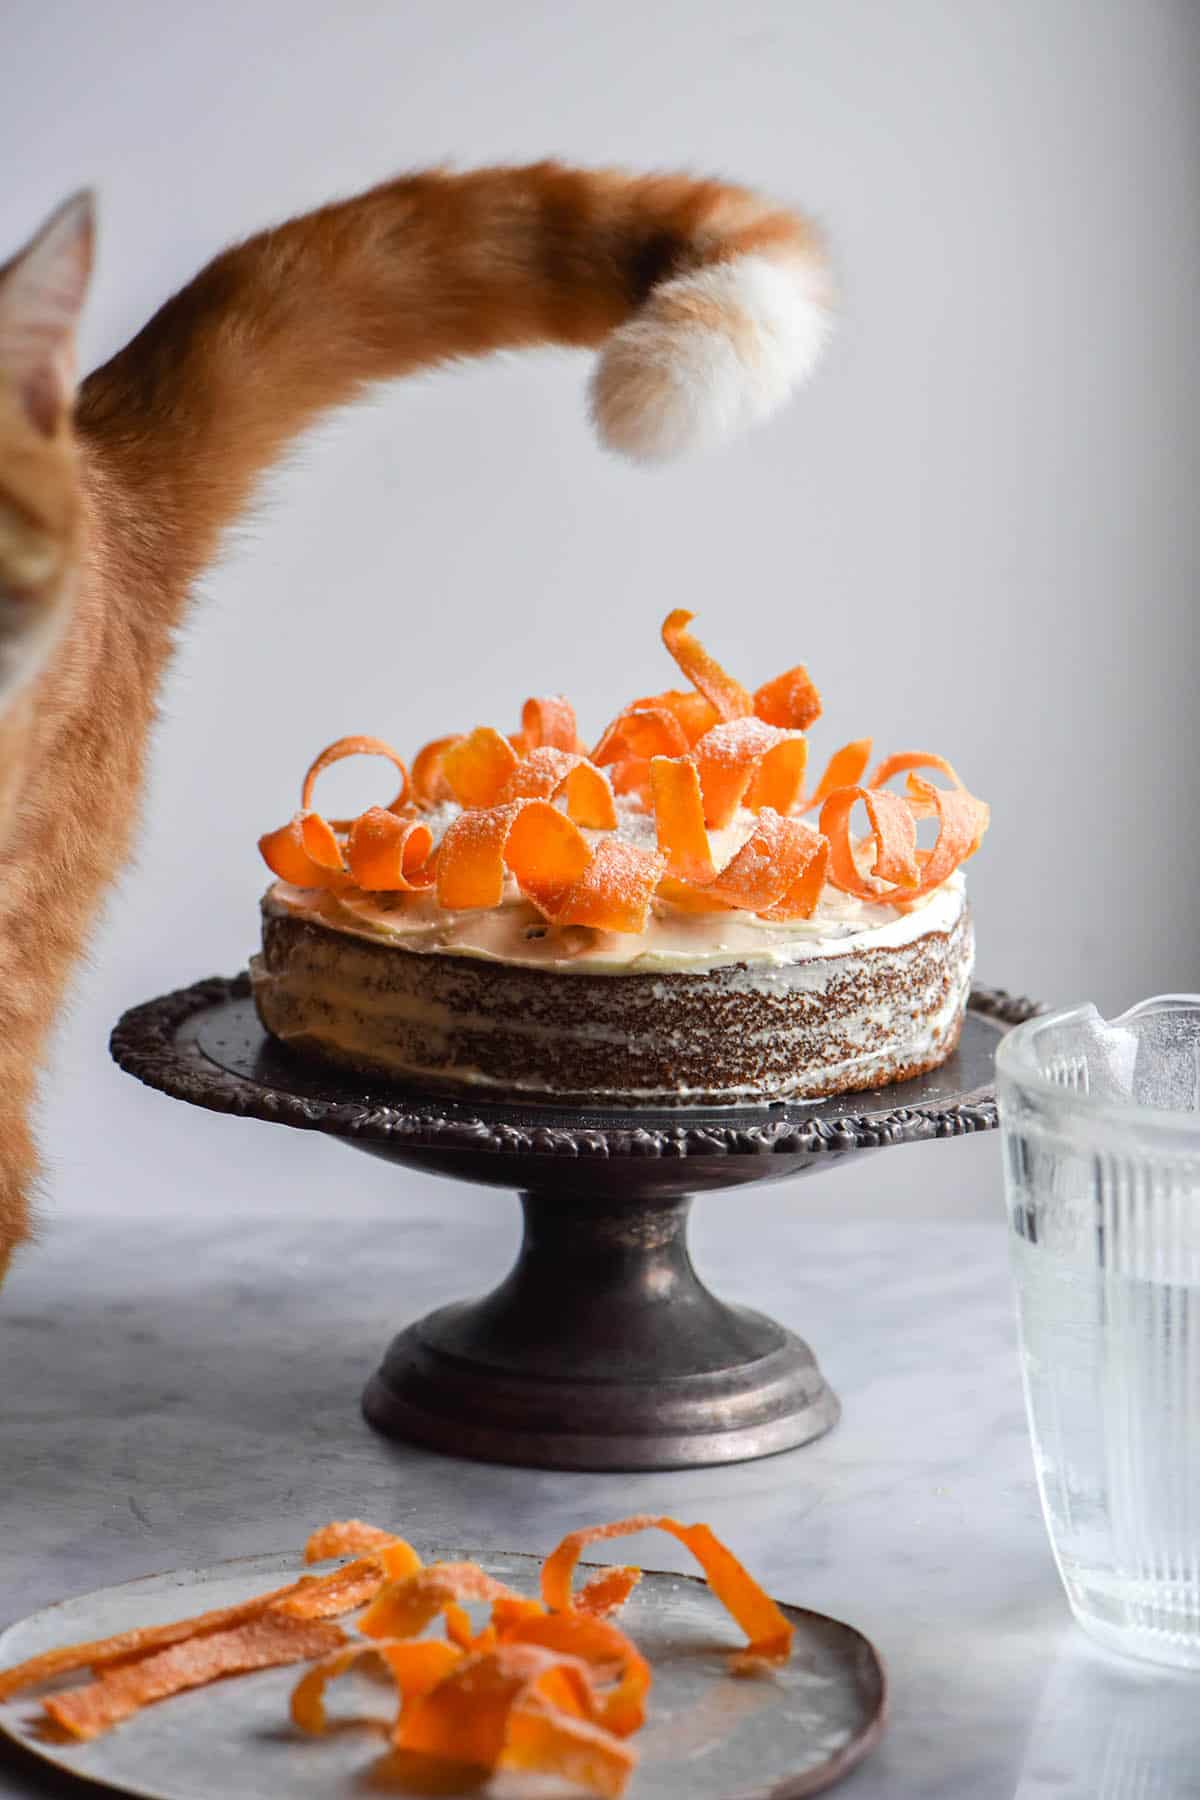 A side on image of a gluten free carrot cake topped with candied carrot swirls. A ginger cat stands to the left of the cake